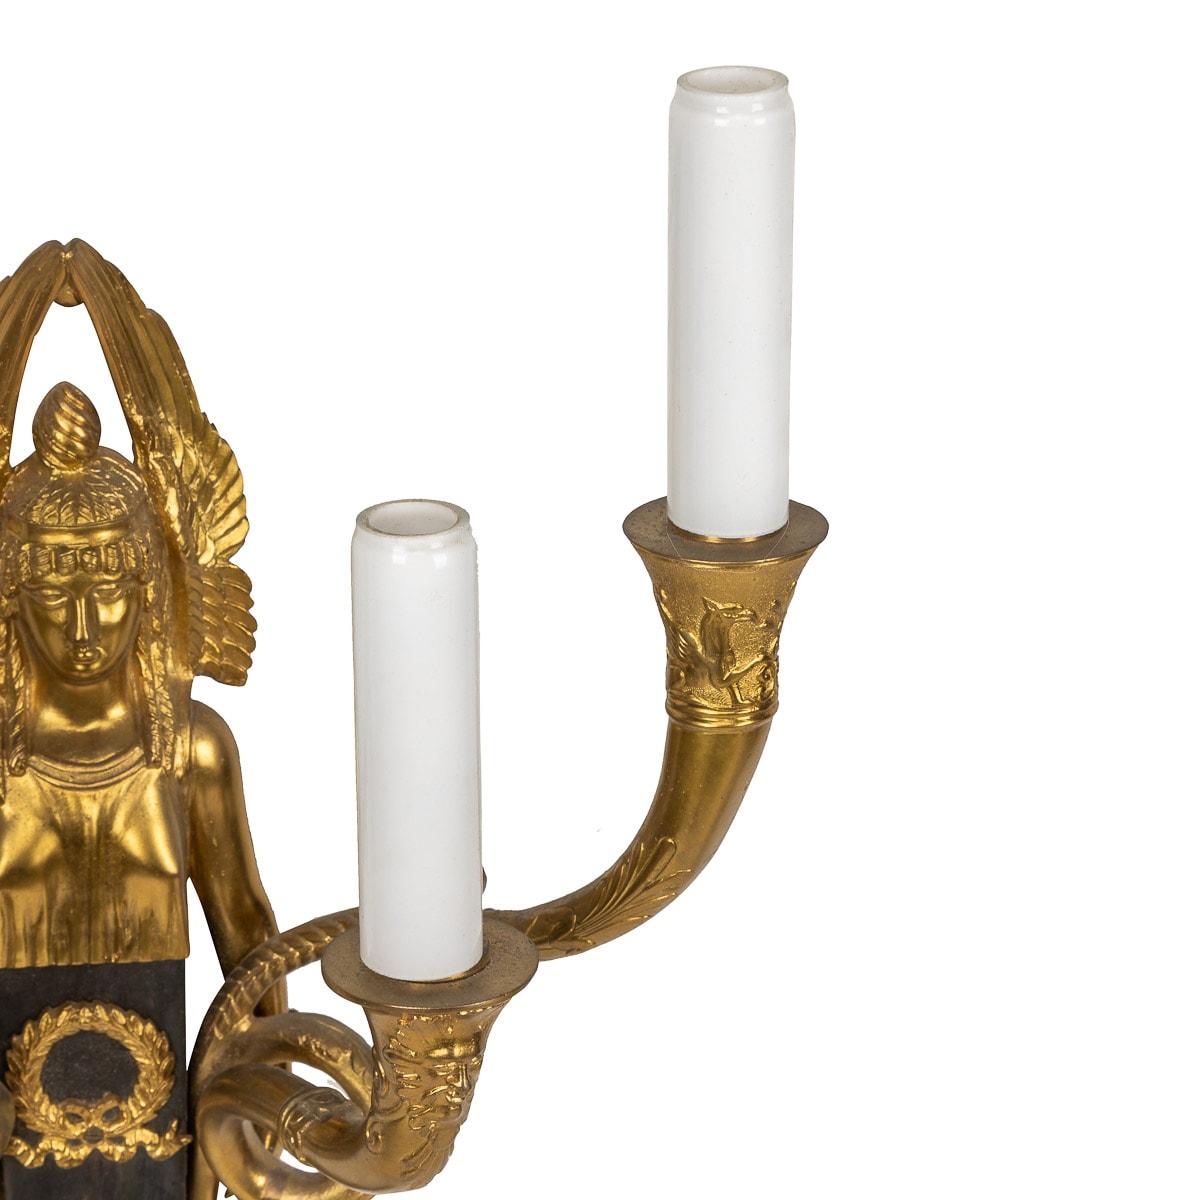 19th Century French Egyptian Revival Part Ormolu D'appliques Wall Lights, c 1830 For Sale 5